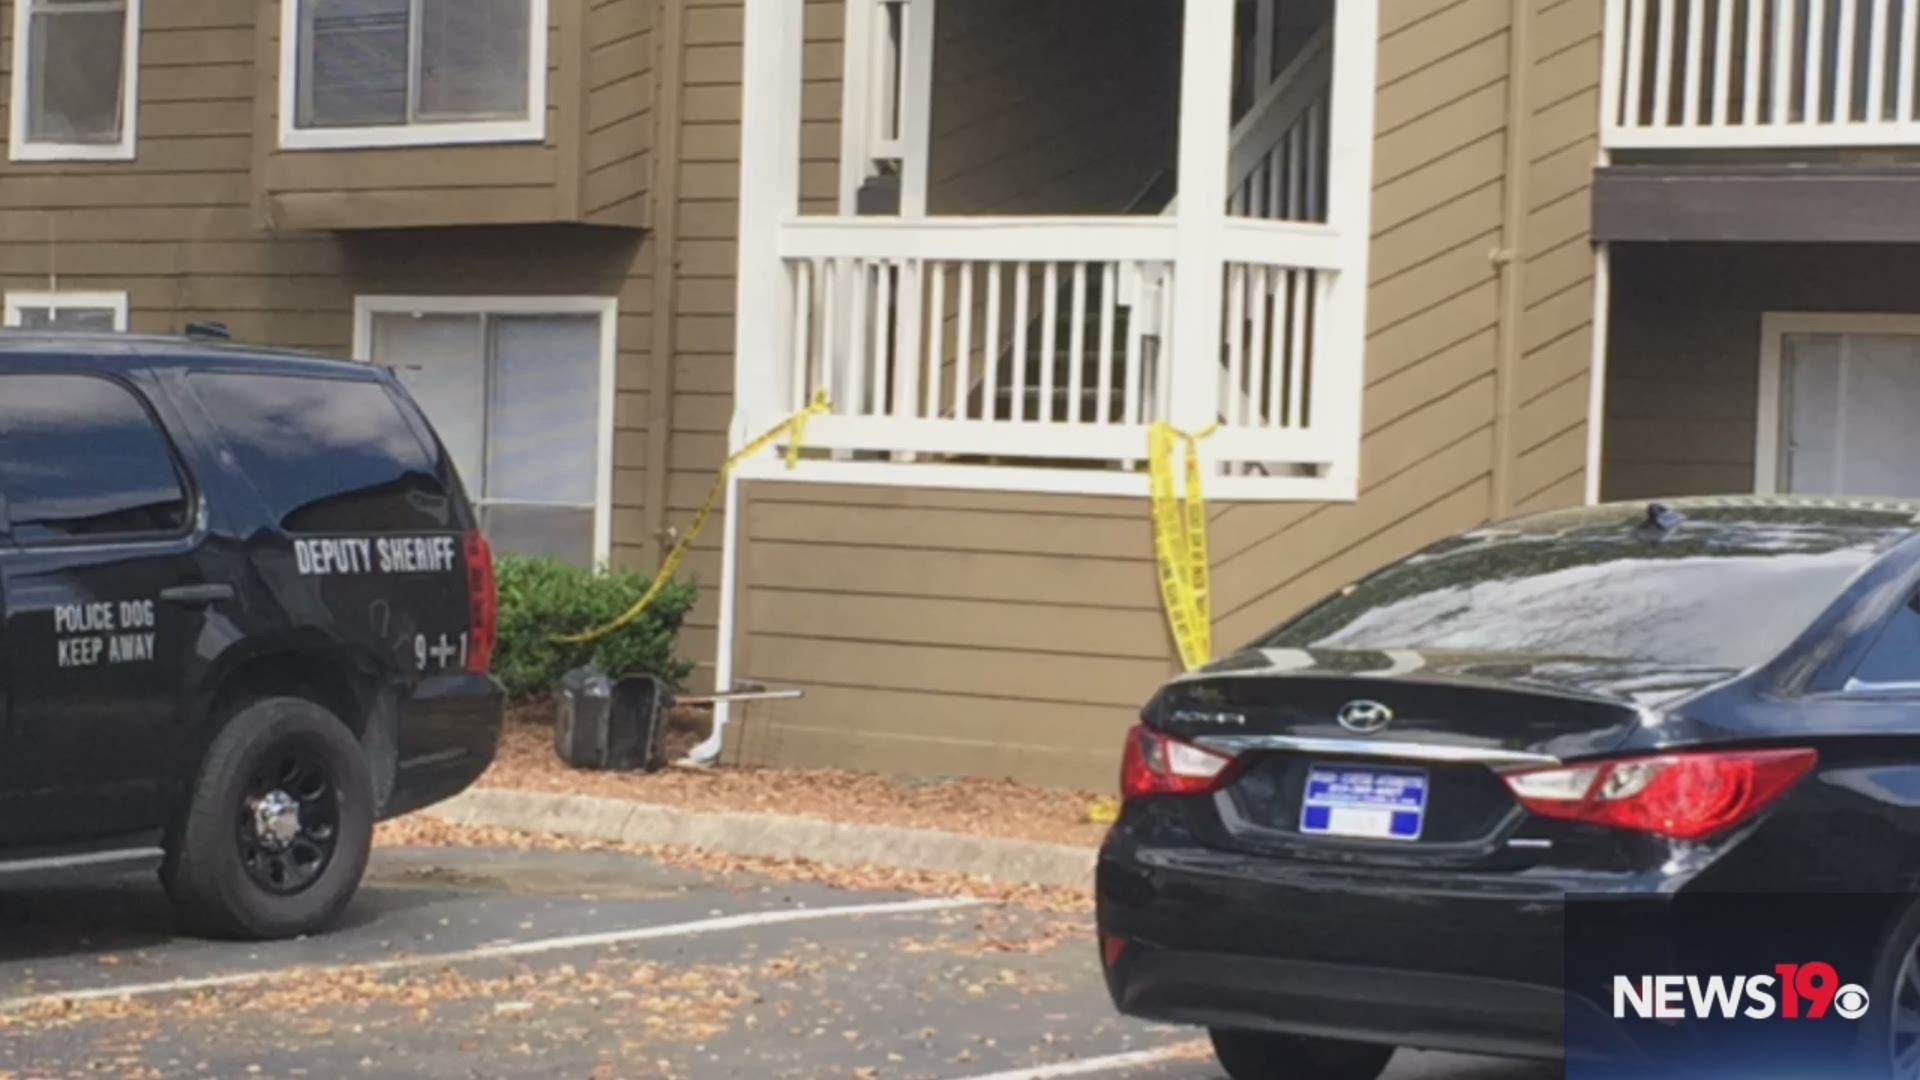 One person has died following a shooting at a local apartment complex.